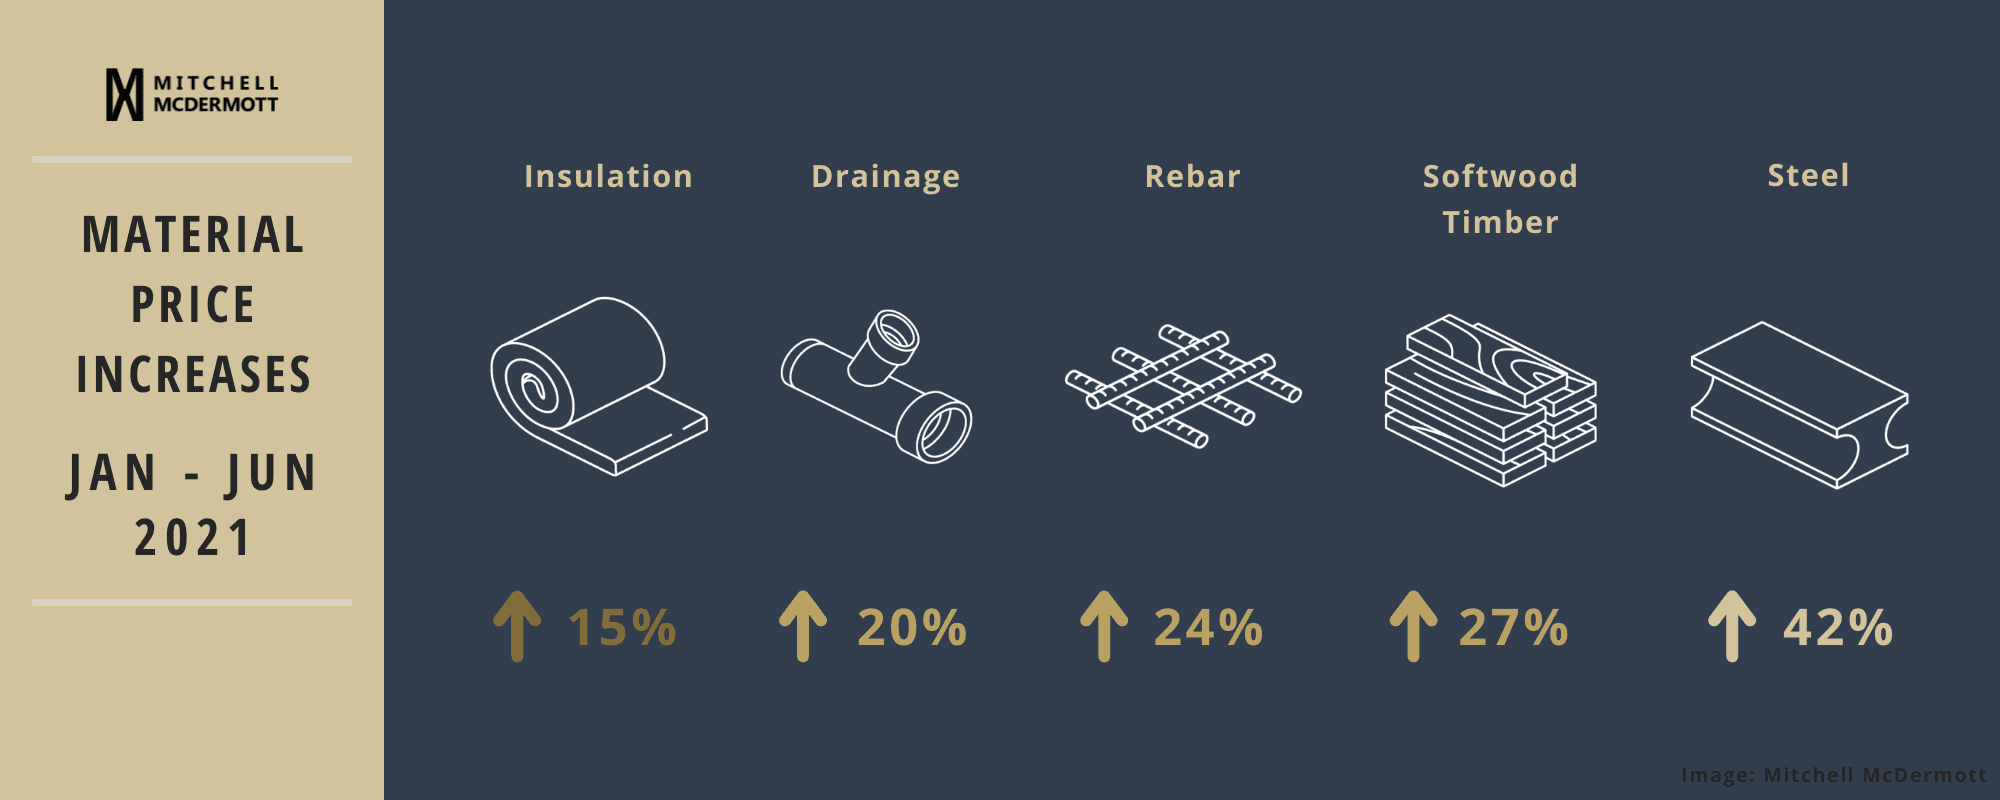 Cost increase percentages of materials